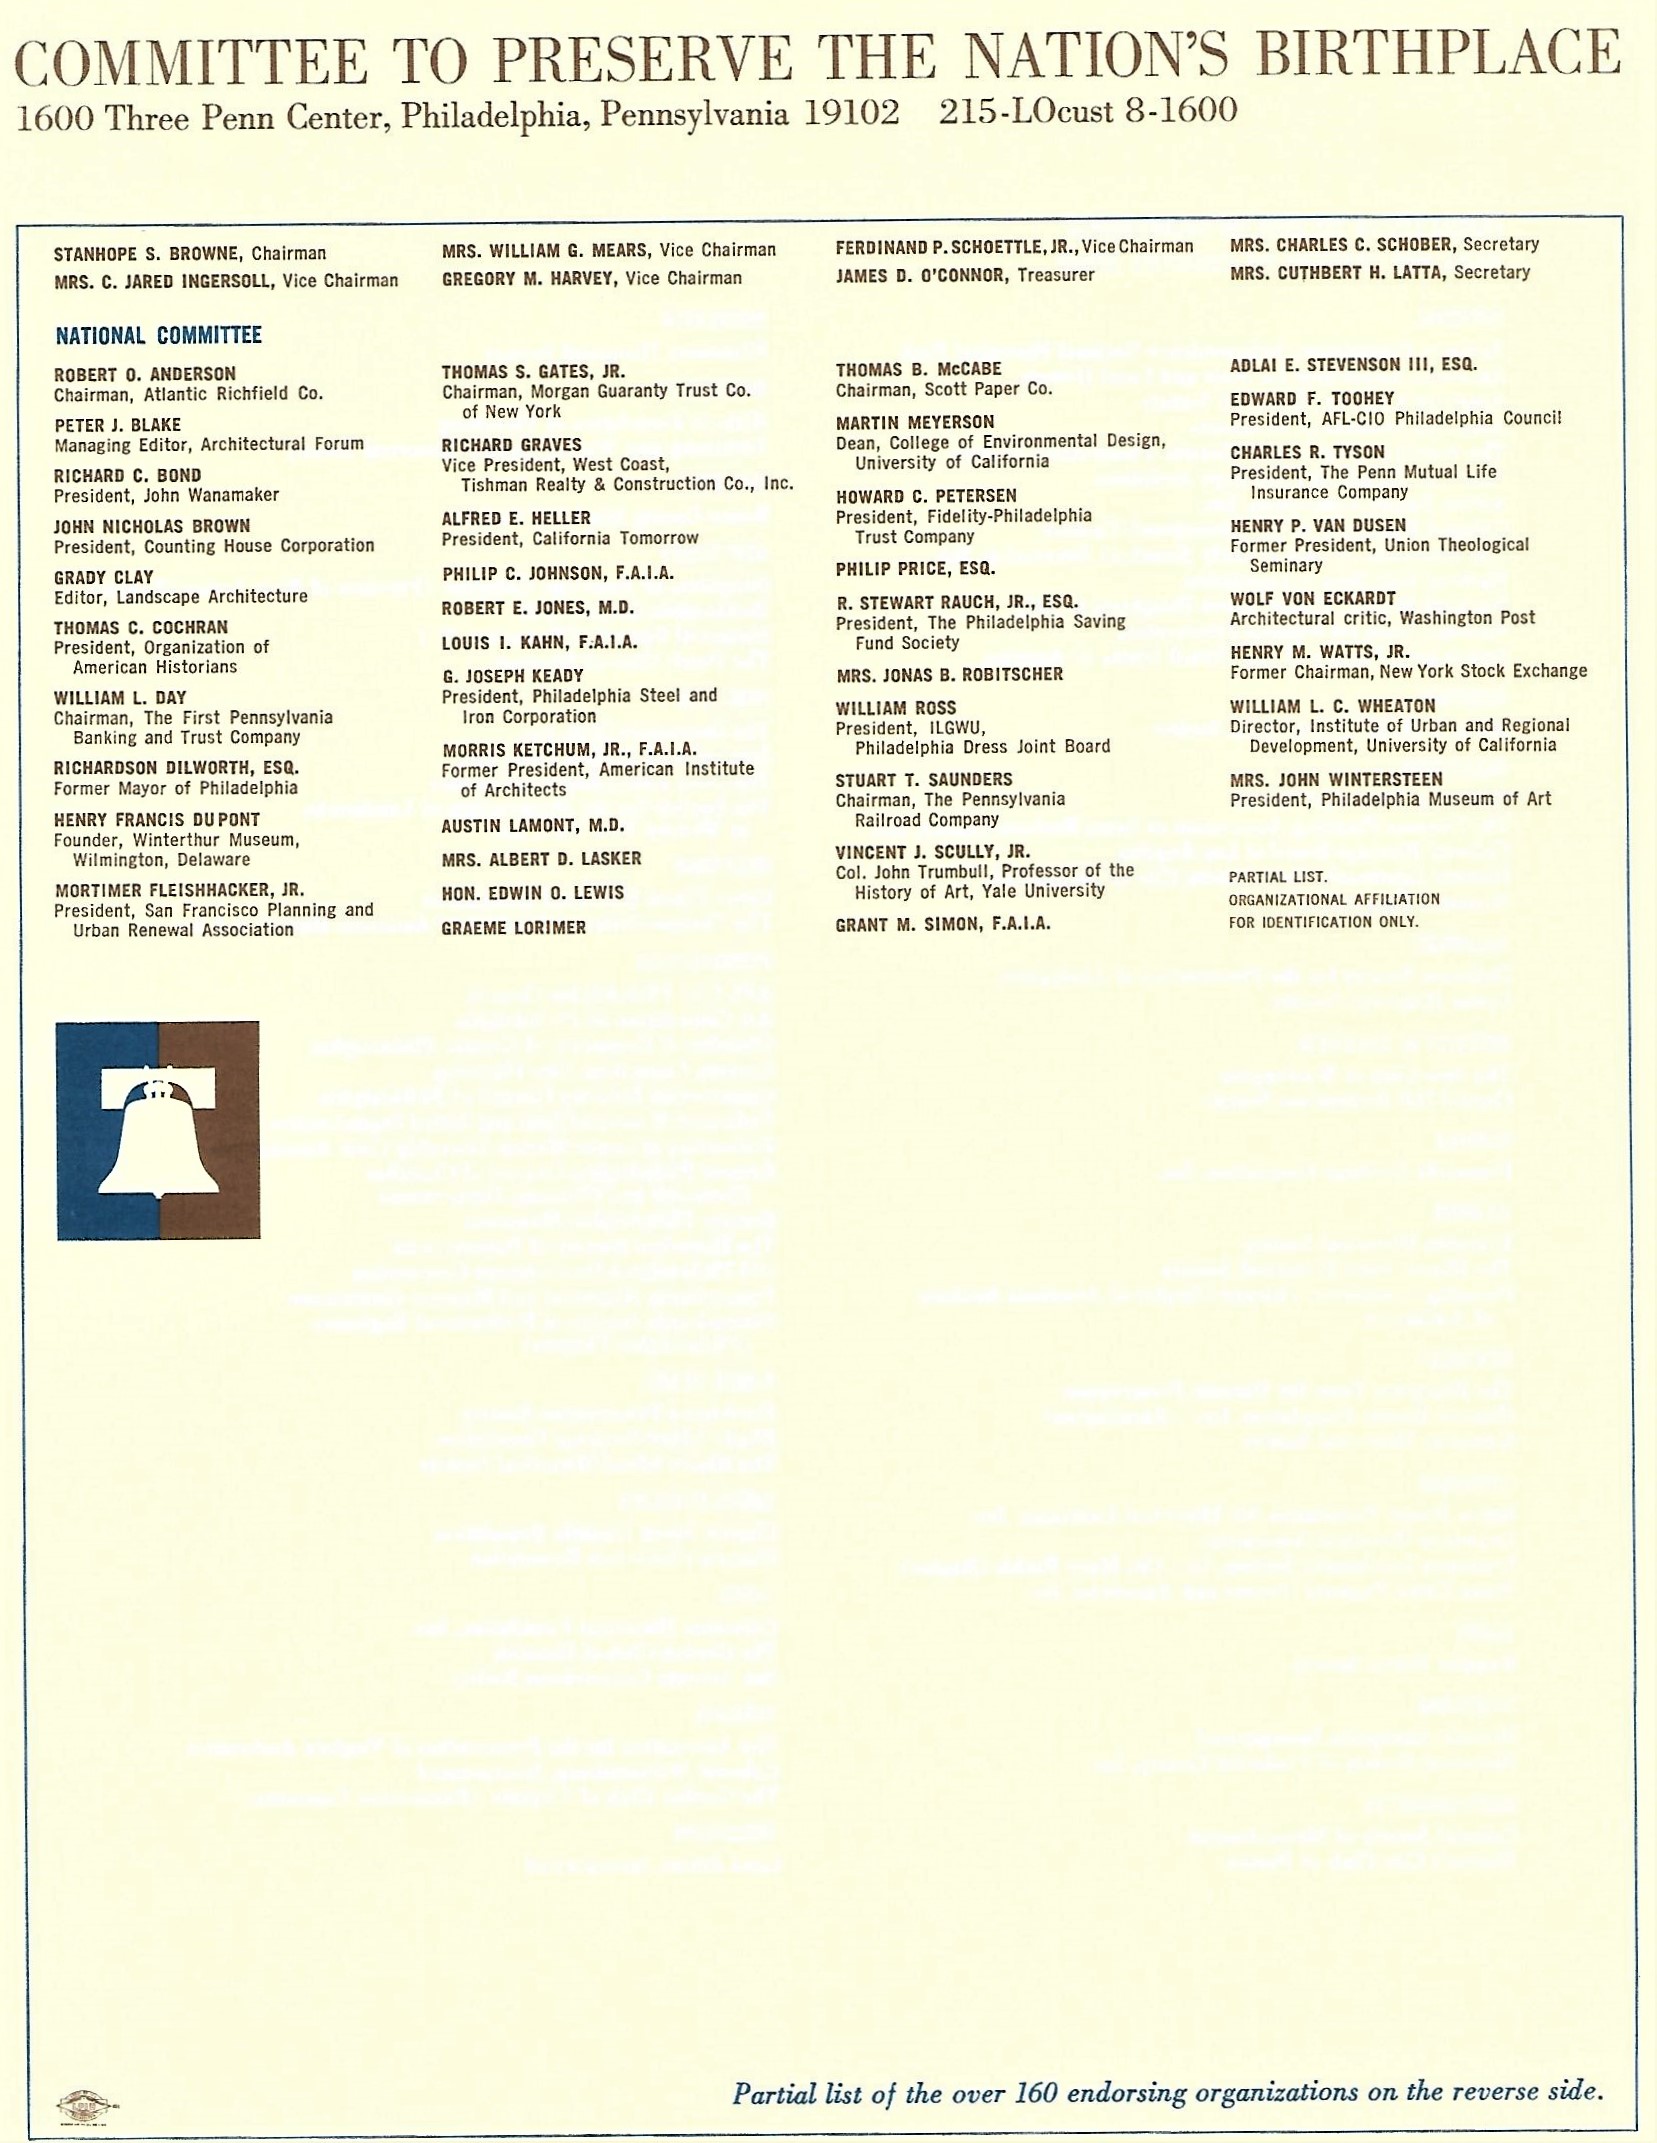 Letterhead showing influential support for the effort. The reverse lists 13 national organizations and others in 22 states and the District of Columbia, 160 in all